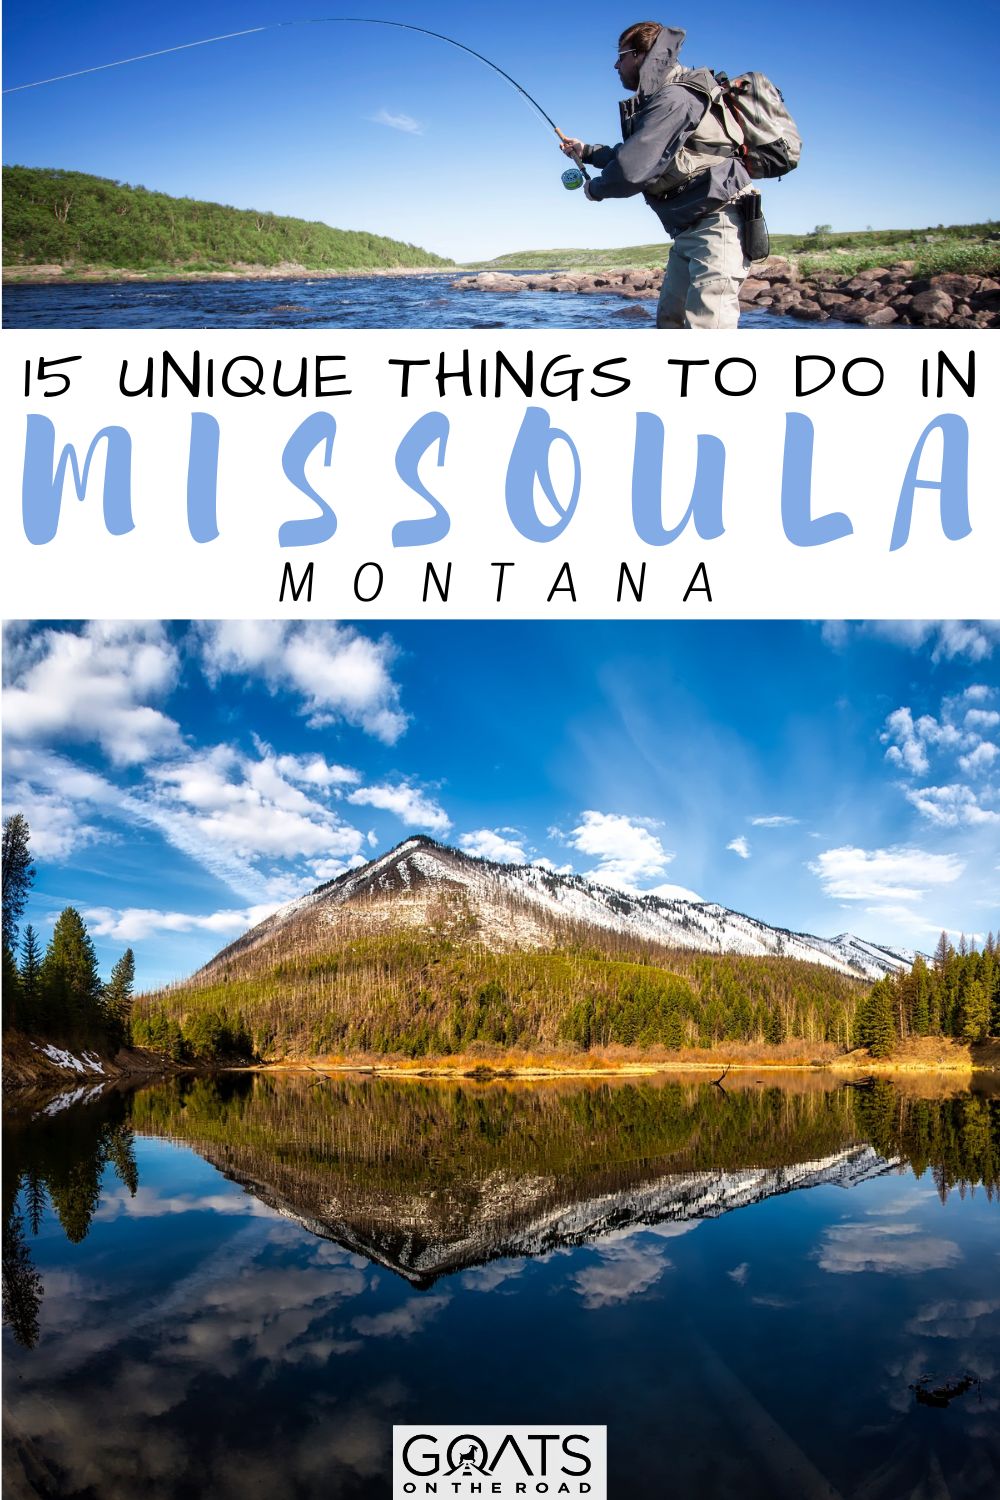 “15 Unique Things To Do in Missoula, Montana